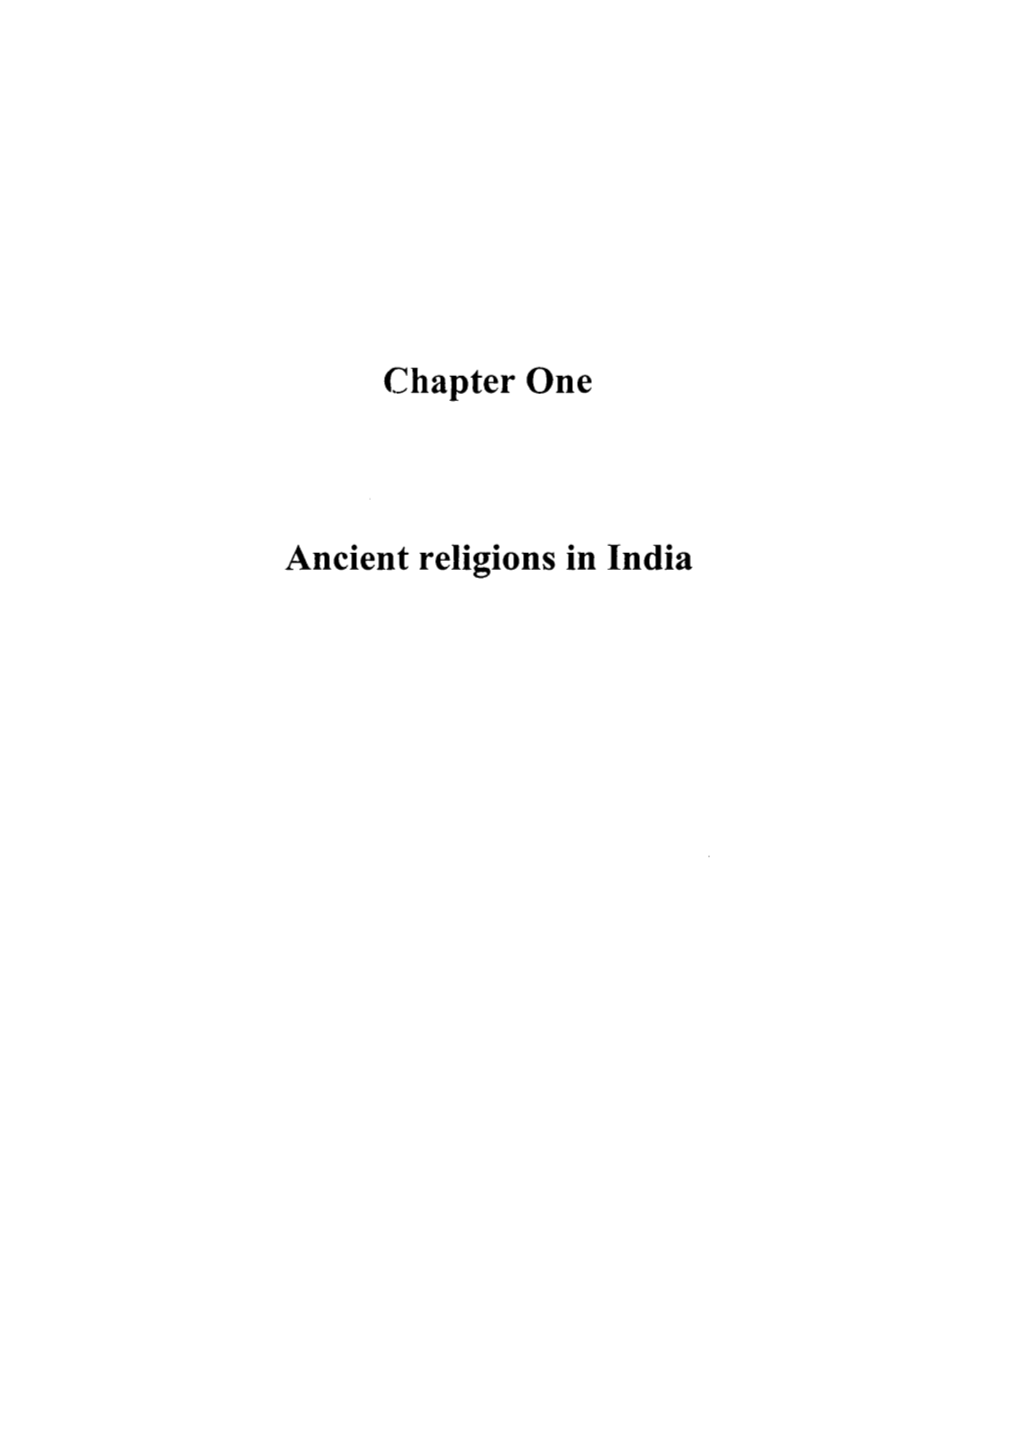 Chapter One Ancient Religions in India